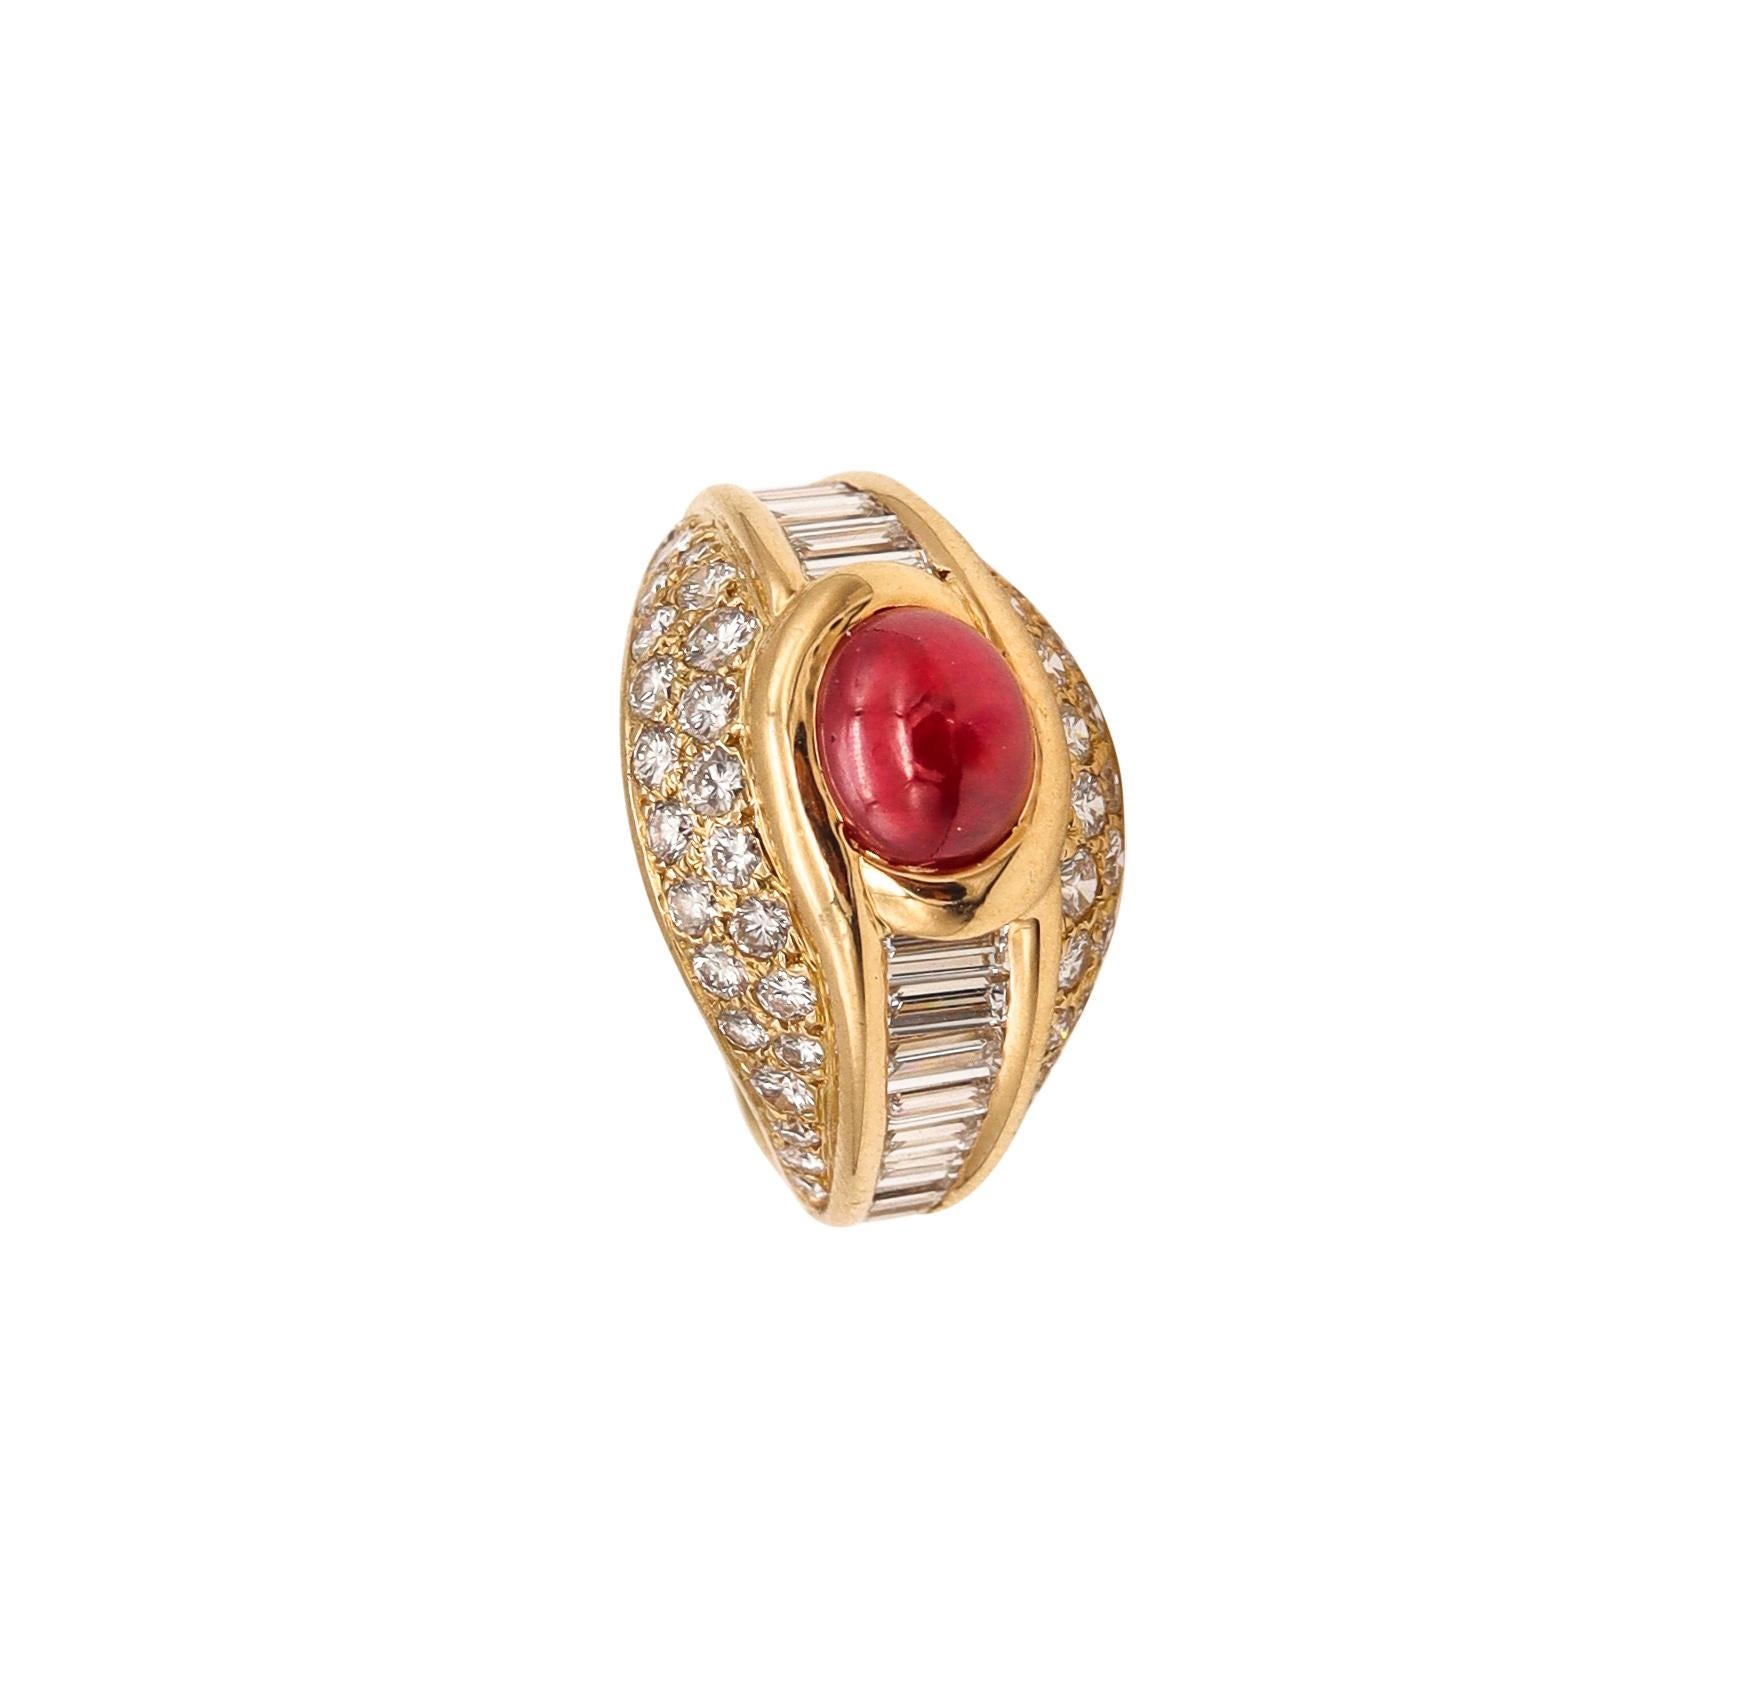 Cartier Paris Cocktail Ring in 18Kt Yellow Gold 4.49 Cts Burmese Ruby Diamonds 2